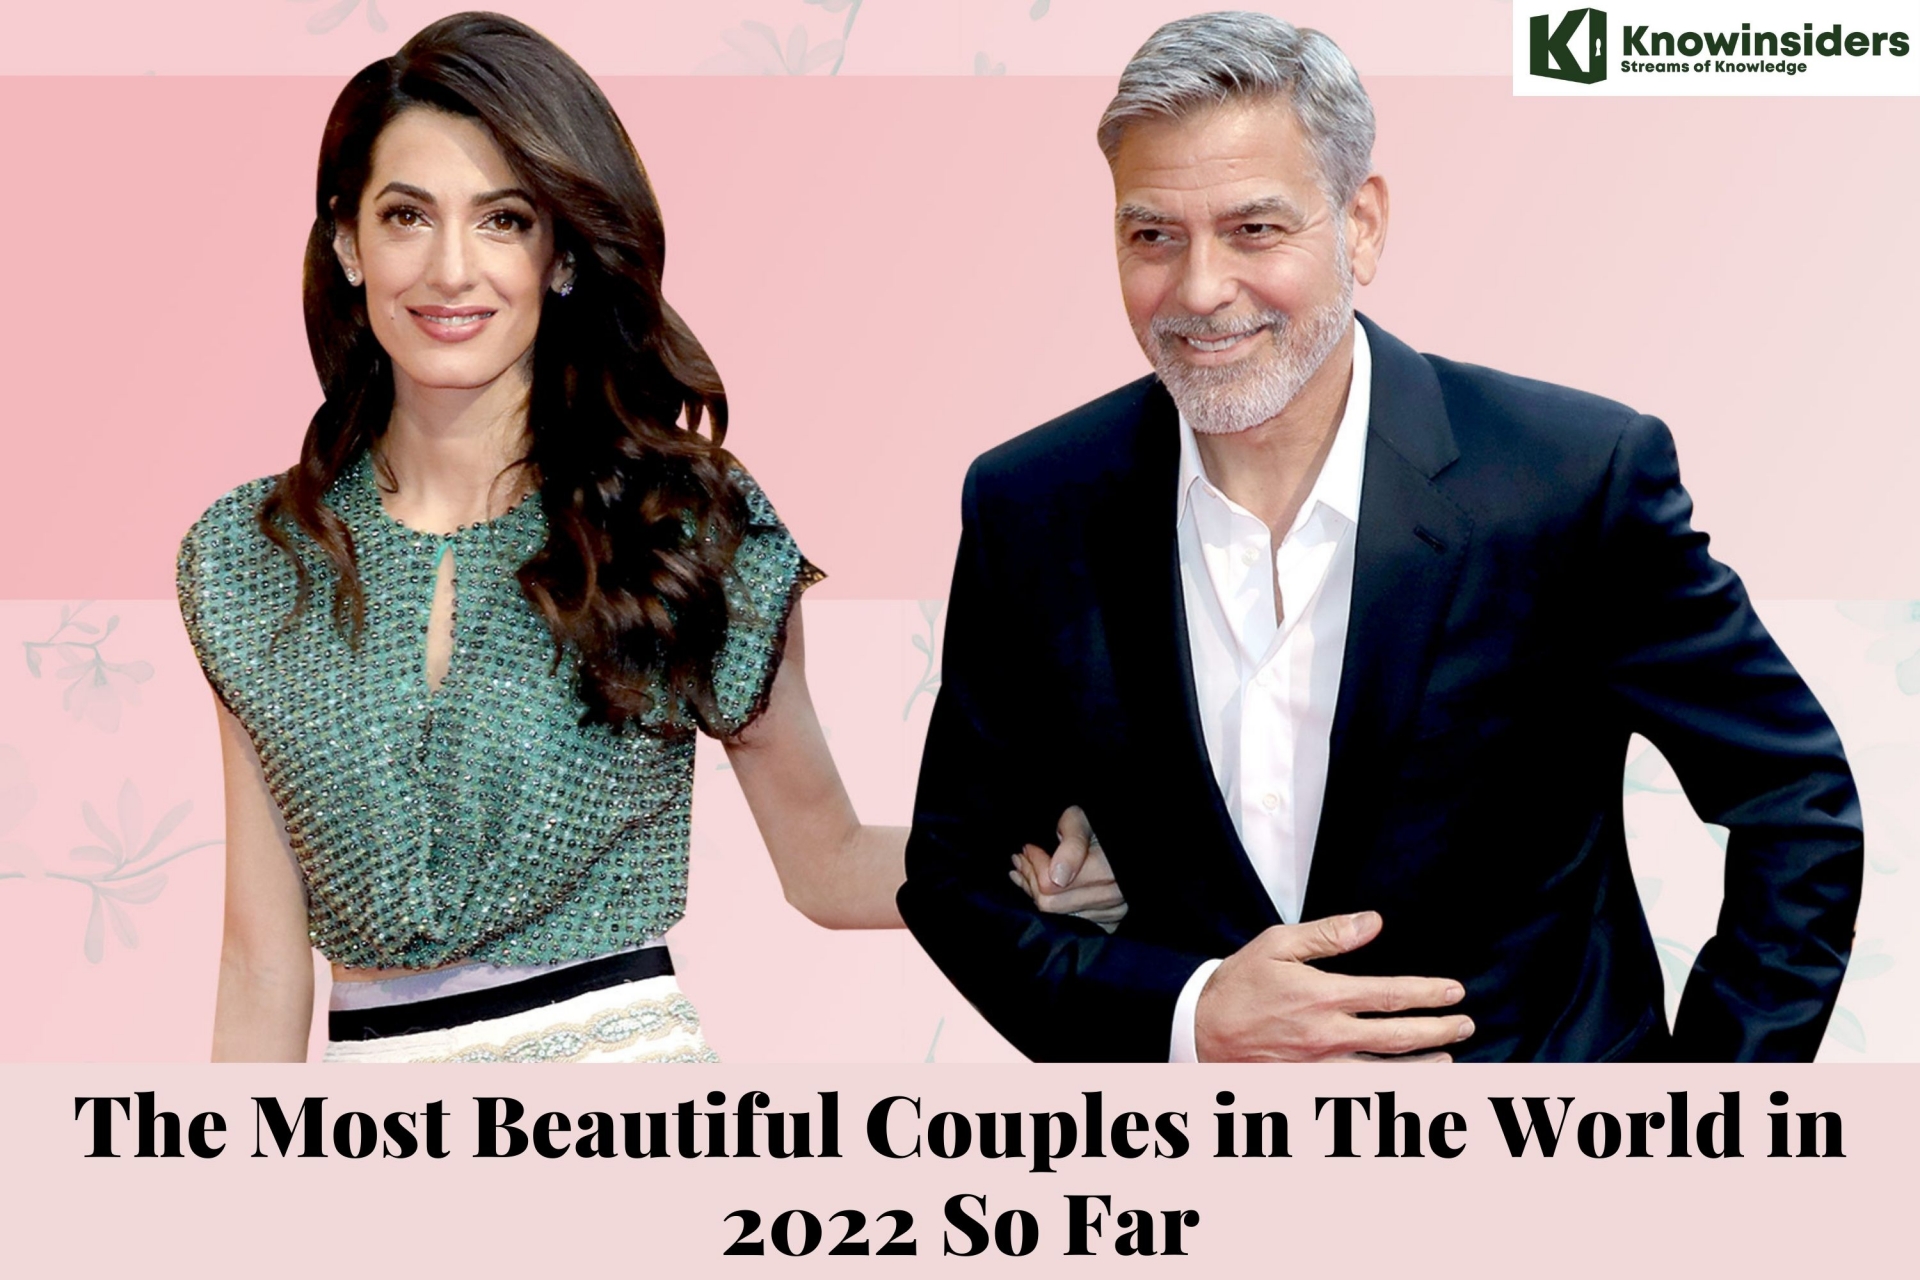 The Most Beautiful Couples in The World in 2022 So Far